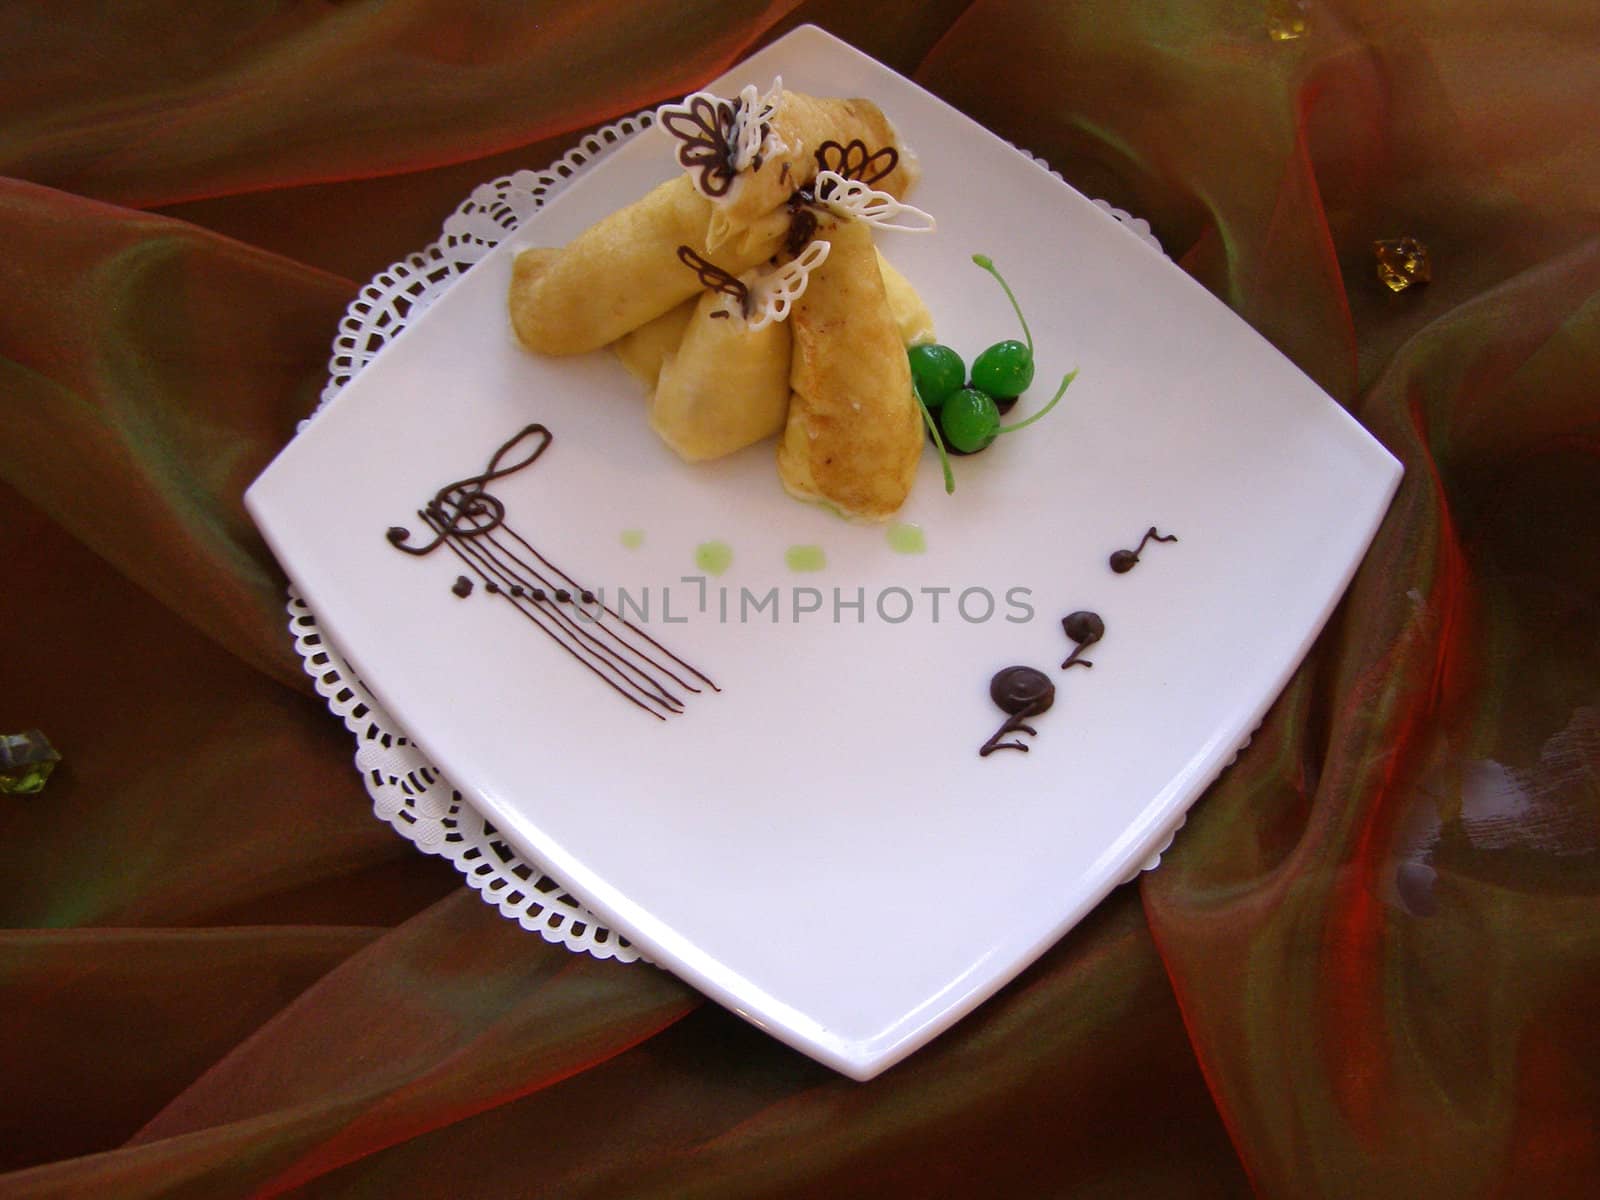 Dish with the pancakes on the tablecloth by Clarushka